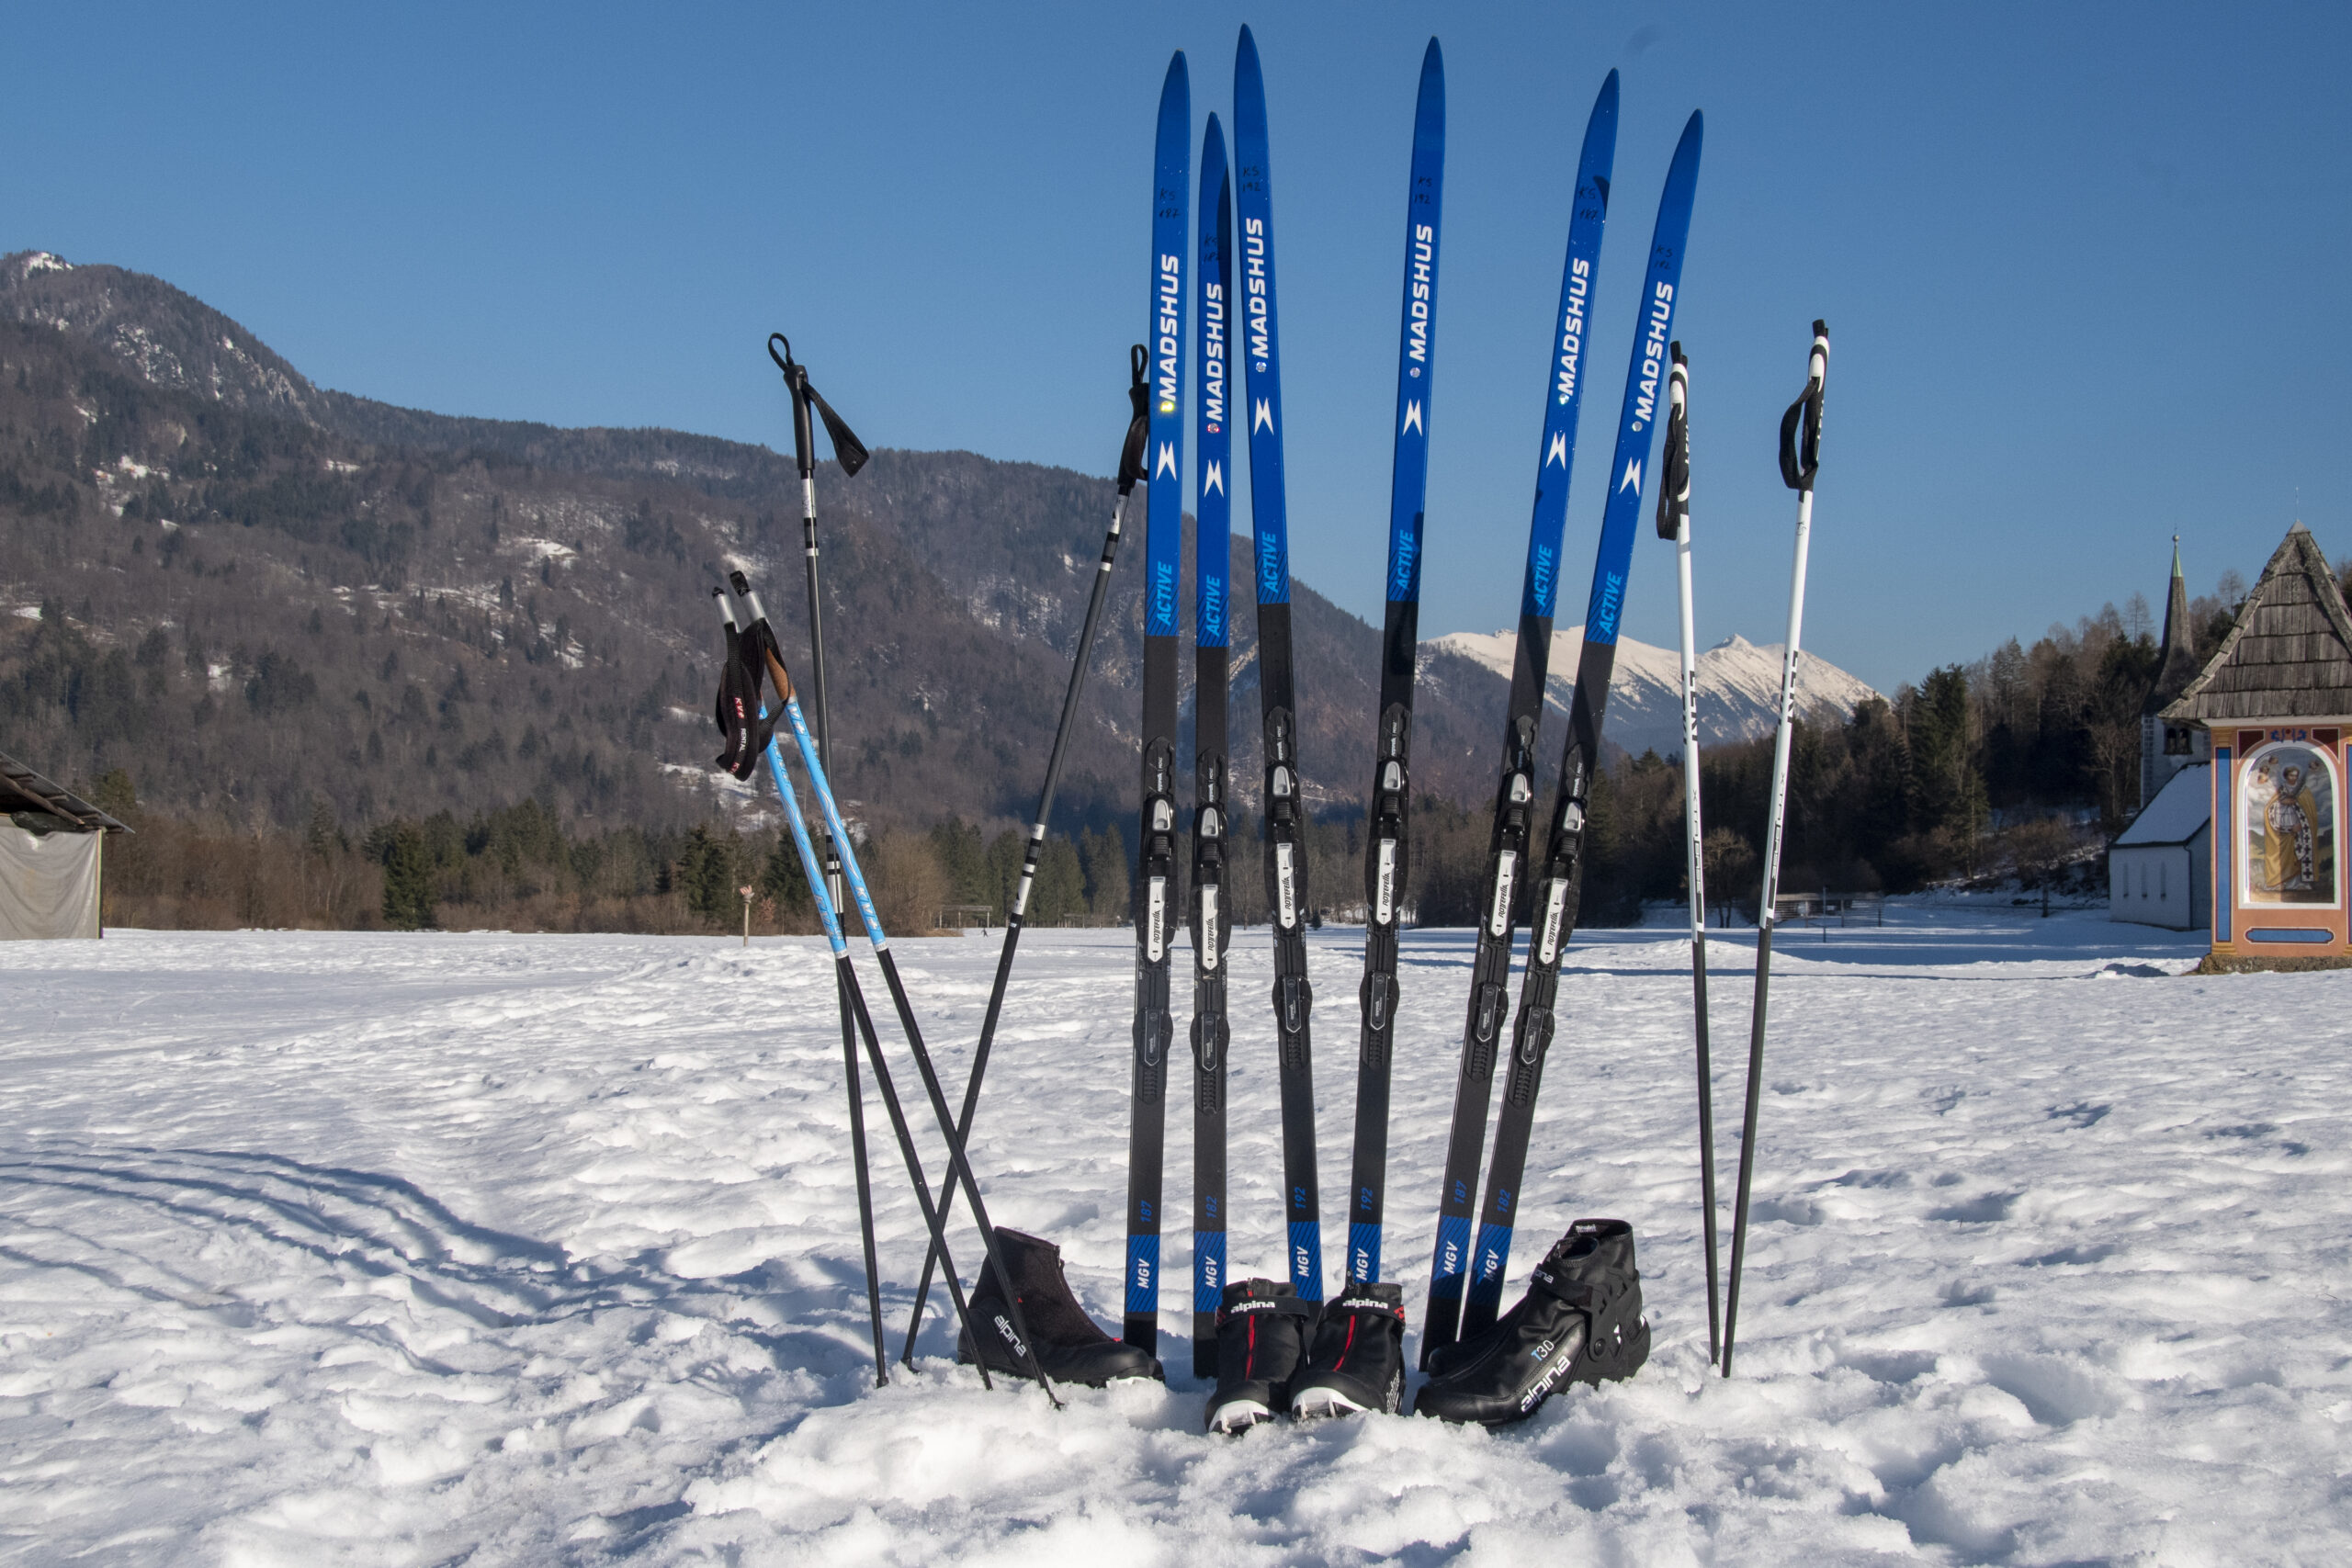 Cross country skiing equipment for rent.